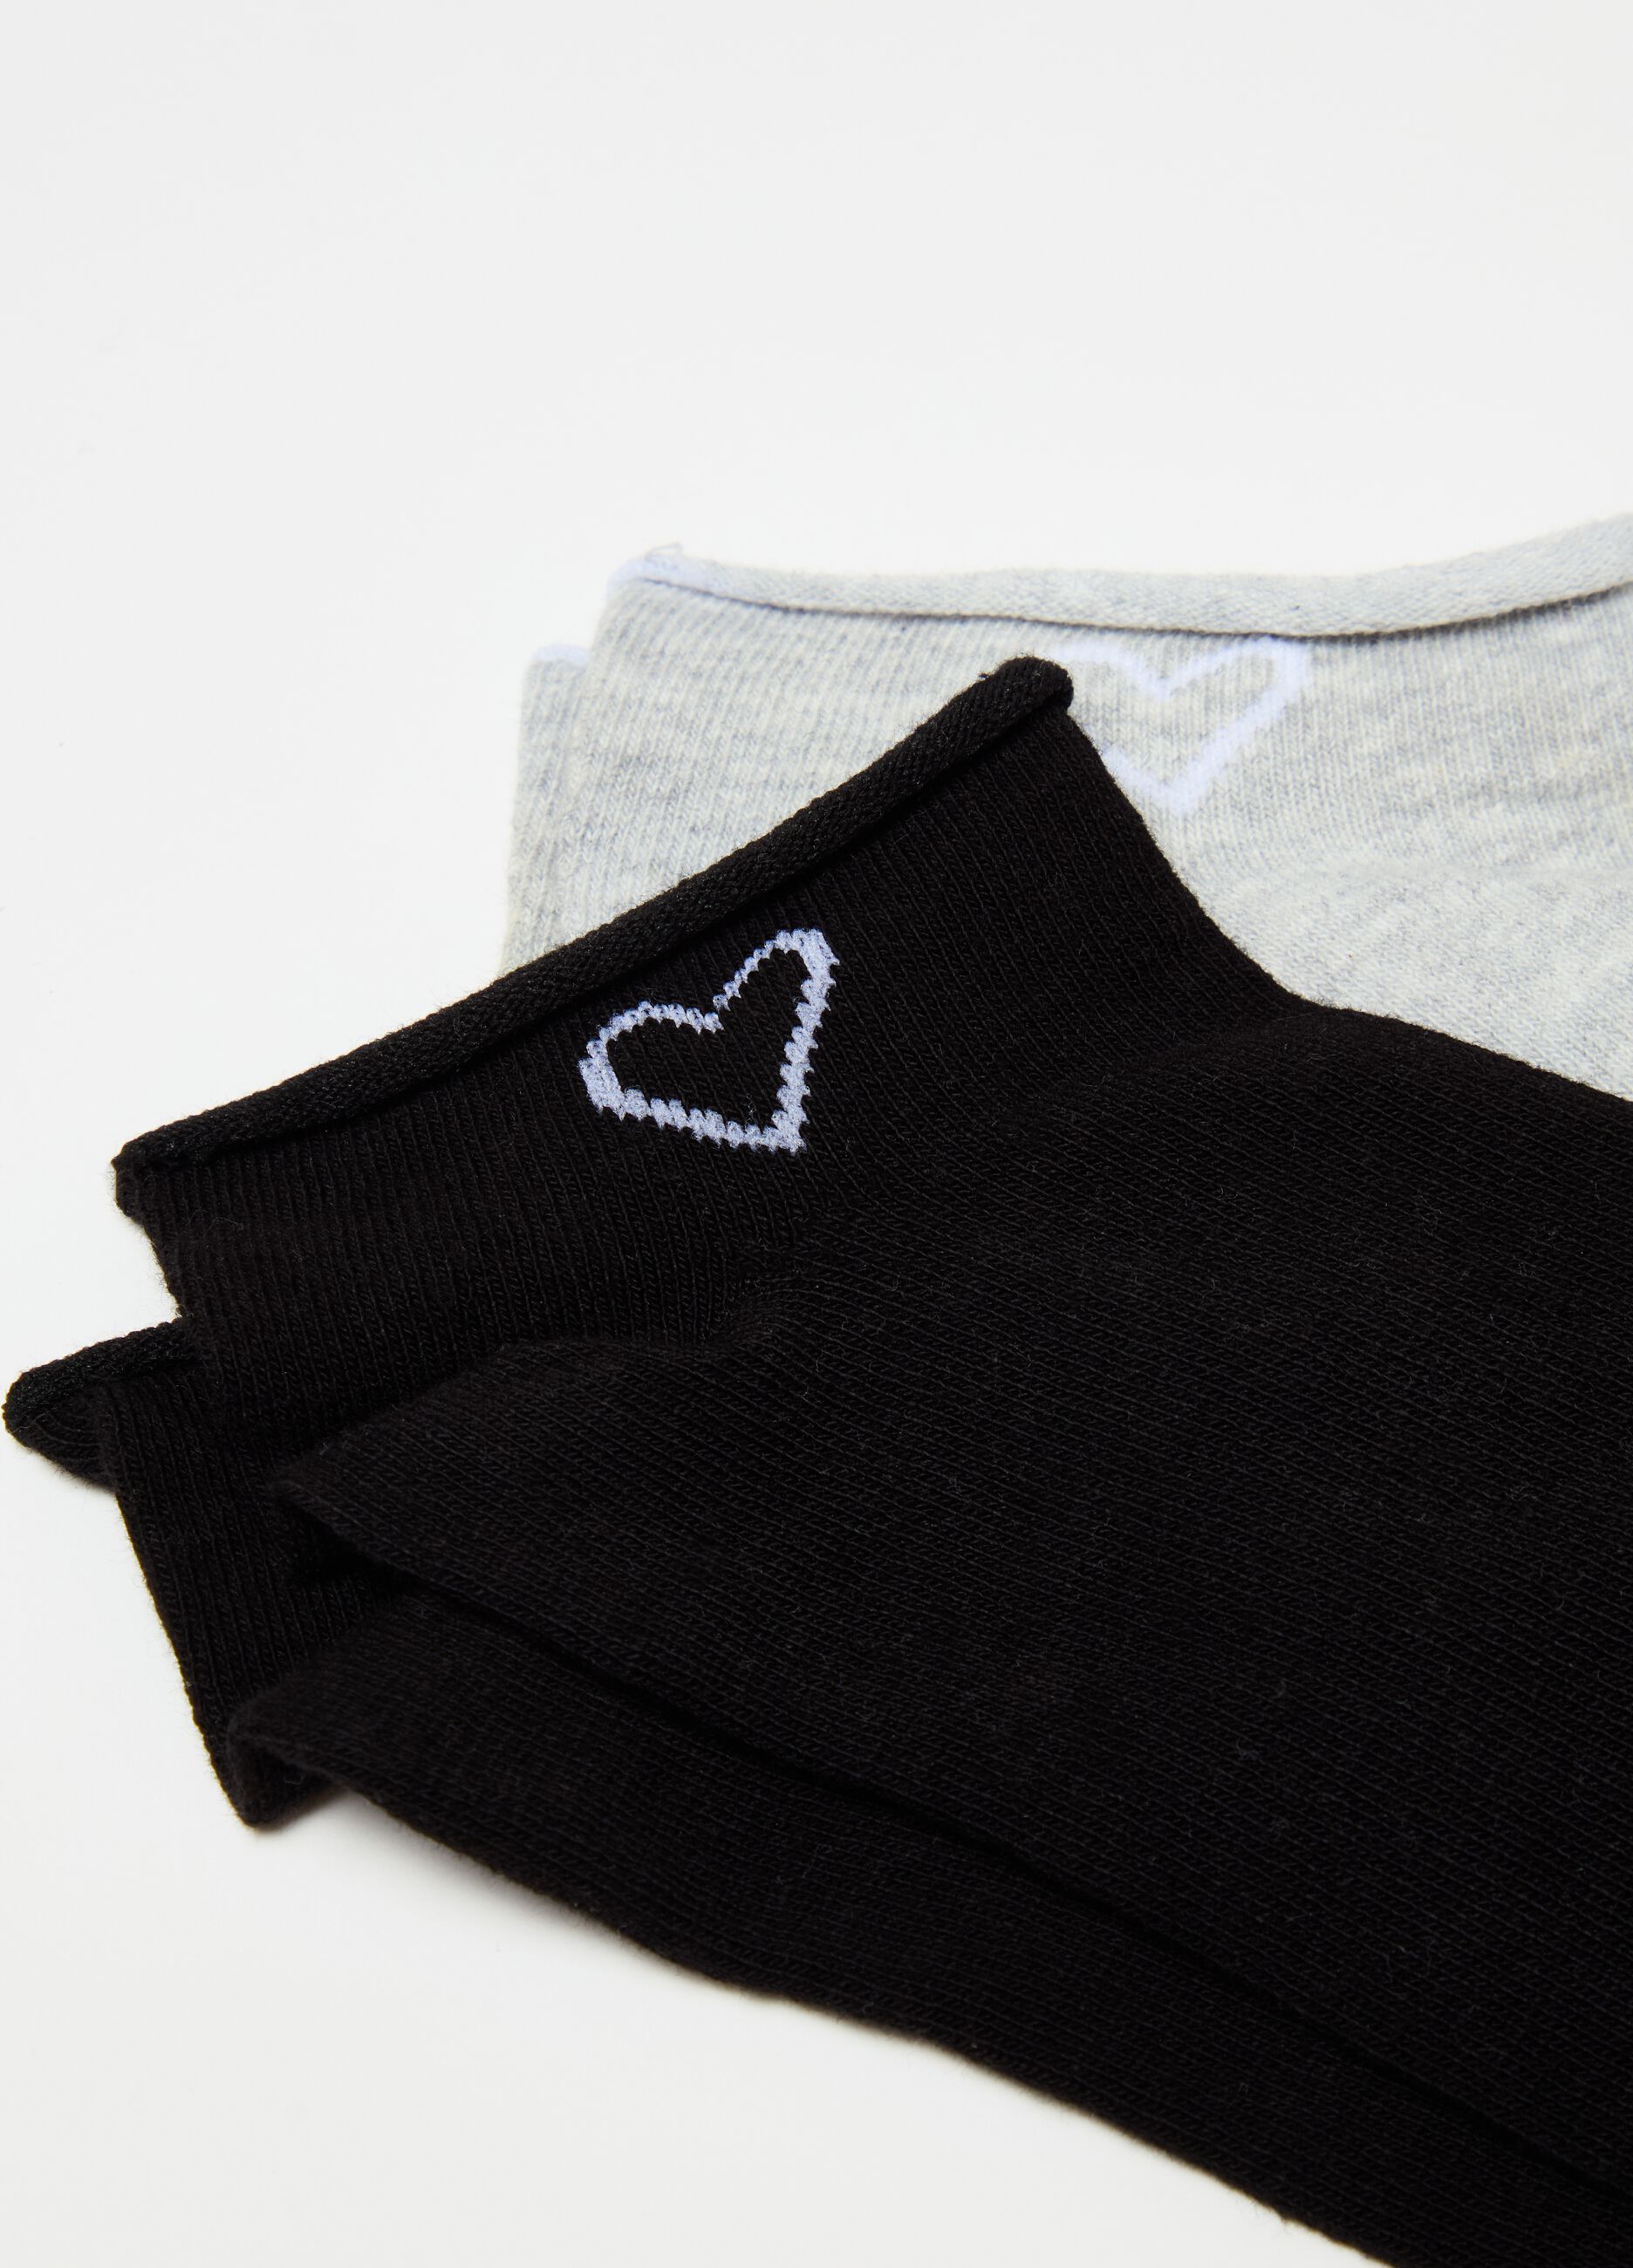 Three-pair pack shoe liners with heart design